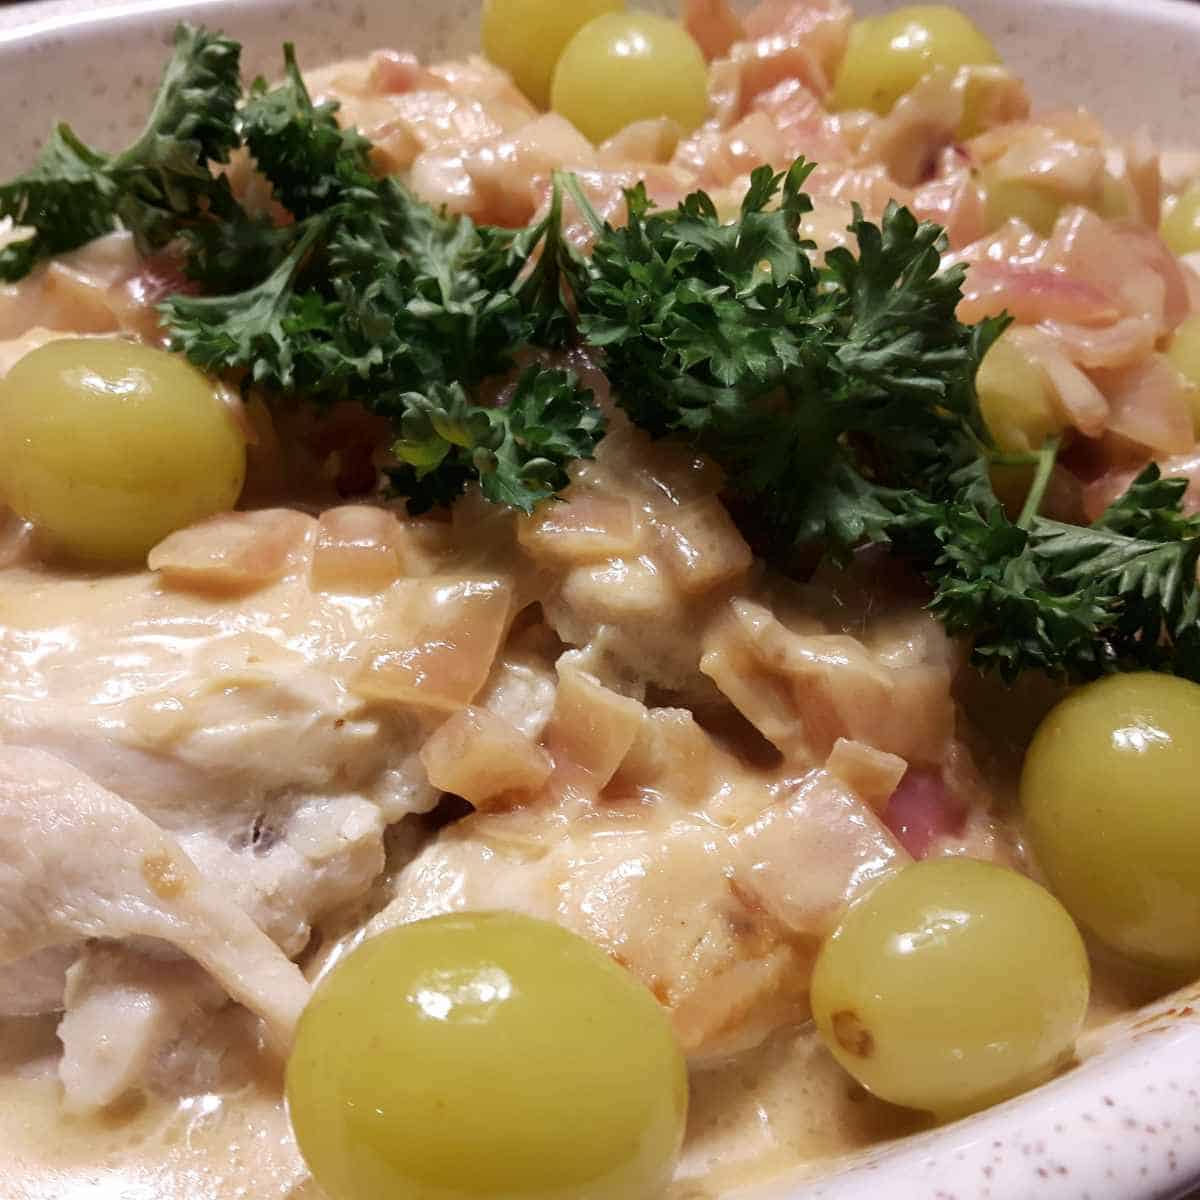 White casserole dish with chicken, grapes, parsley in sauce.